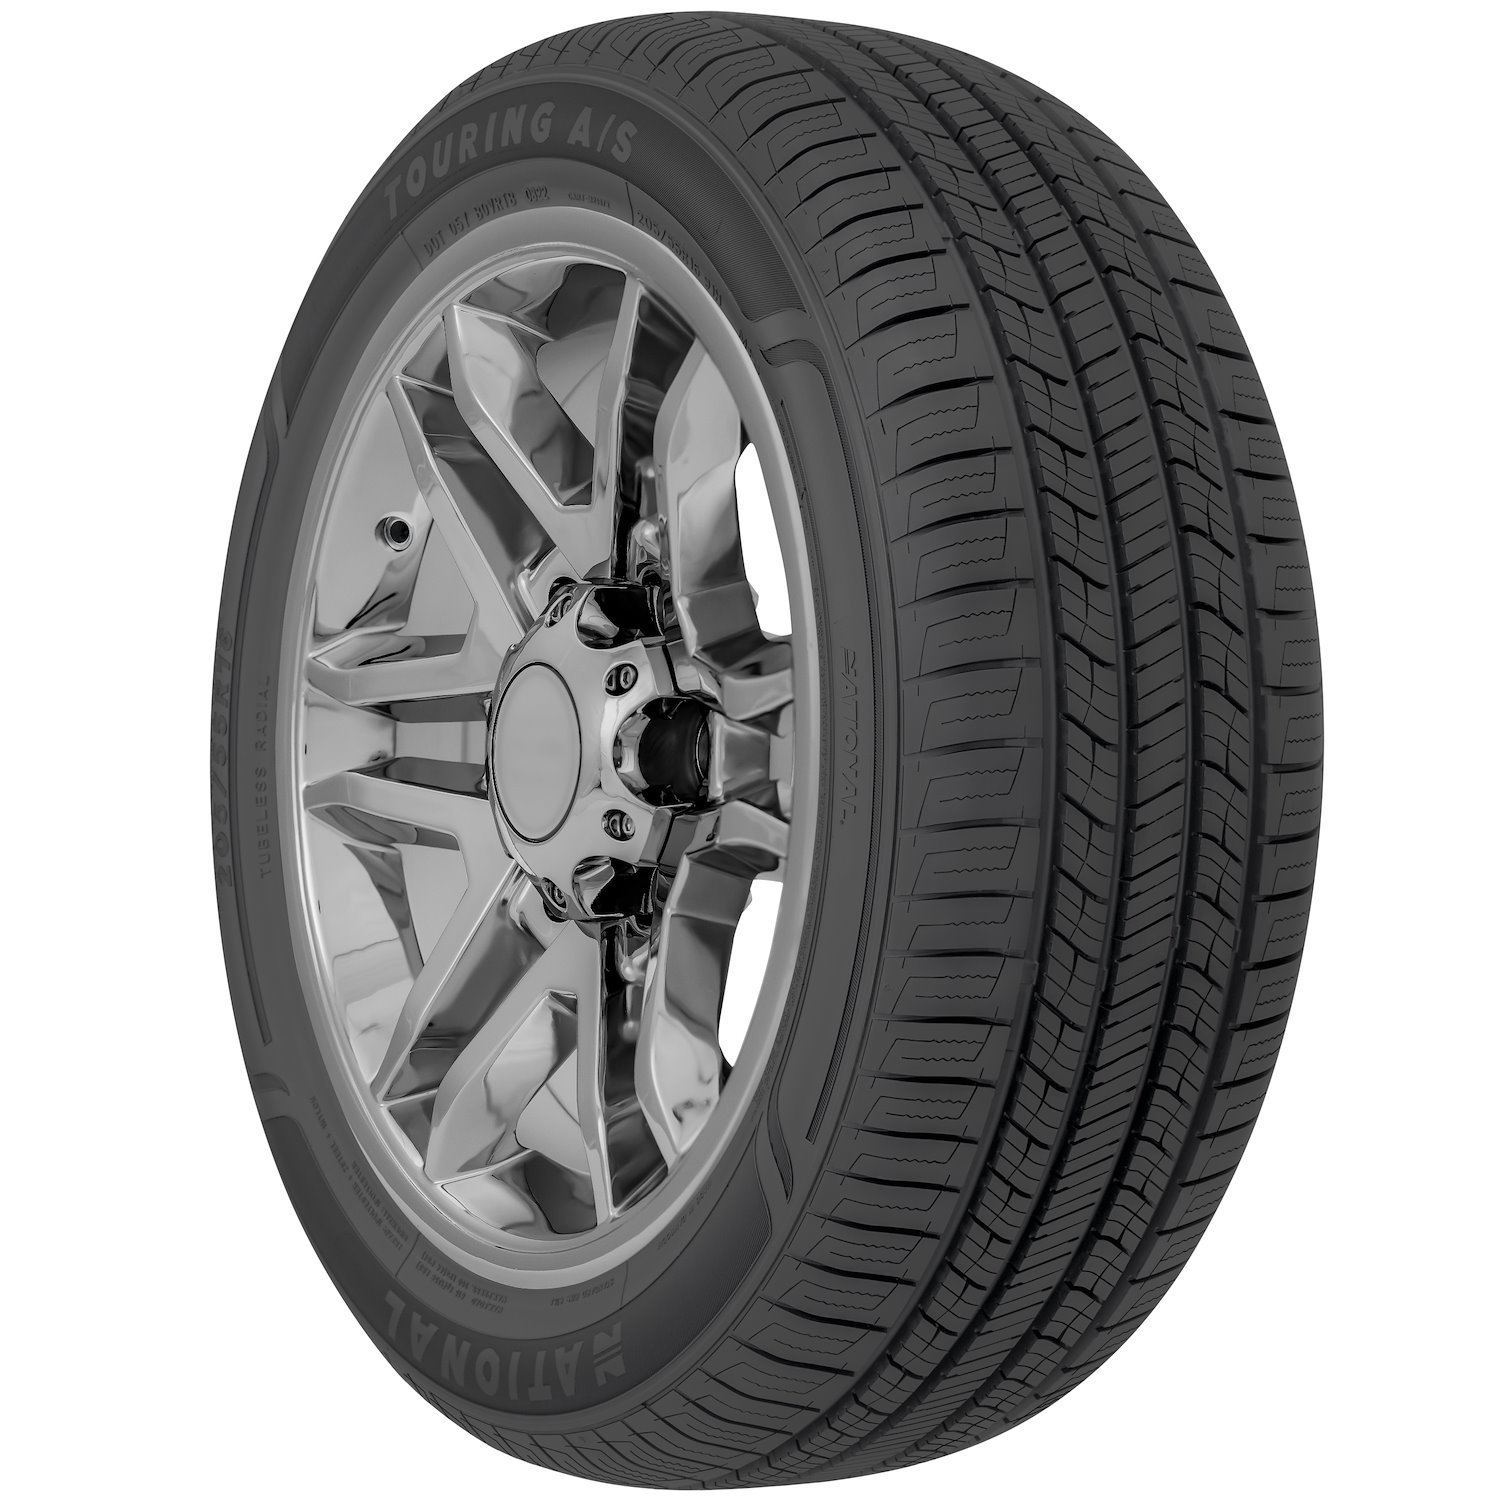 NLR21 Touring A/S Tire, 225/55R19